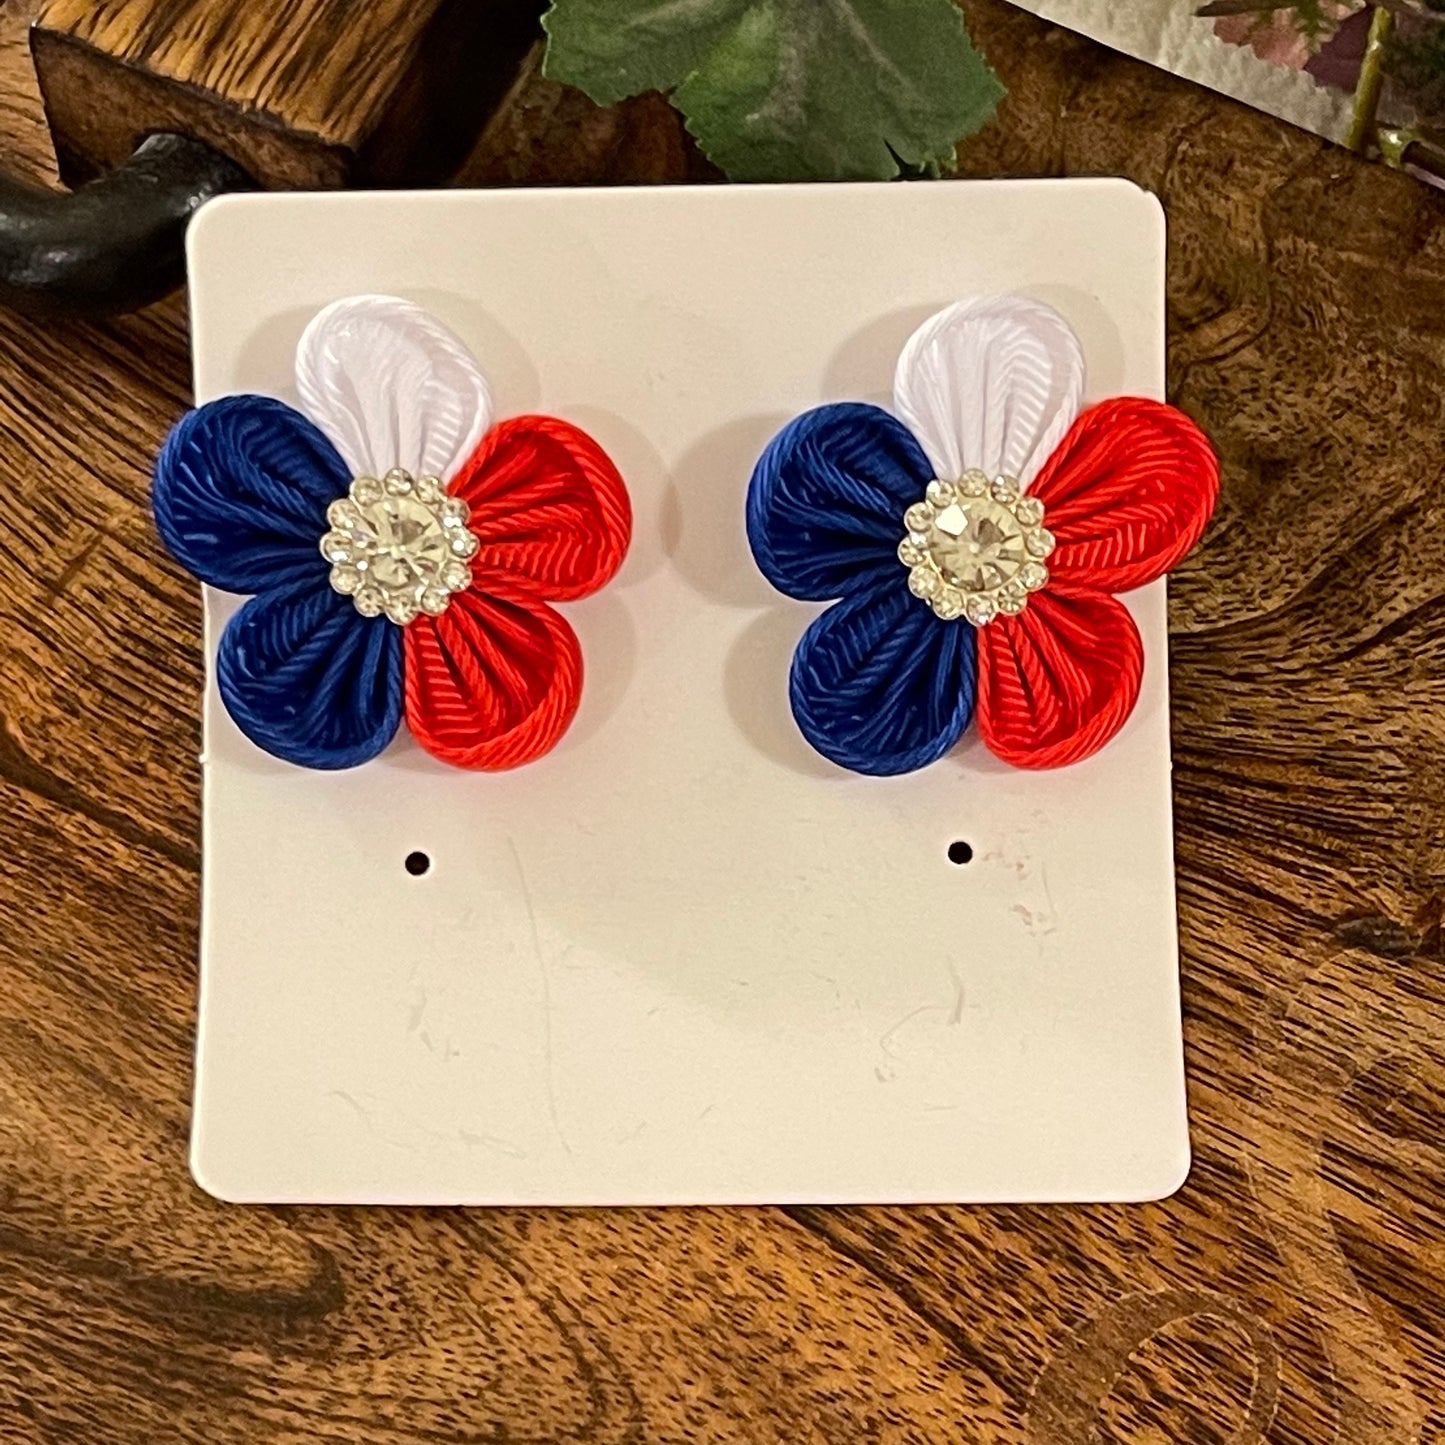 USA 🇺🇸 Red White and Blue Flower with Clear Rhinestone Center Stud Earrings